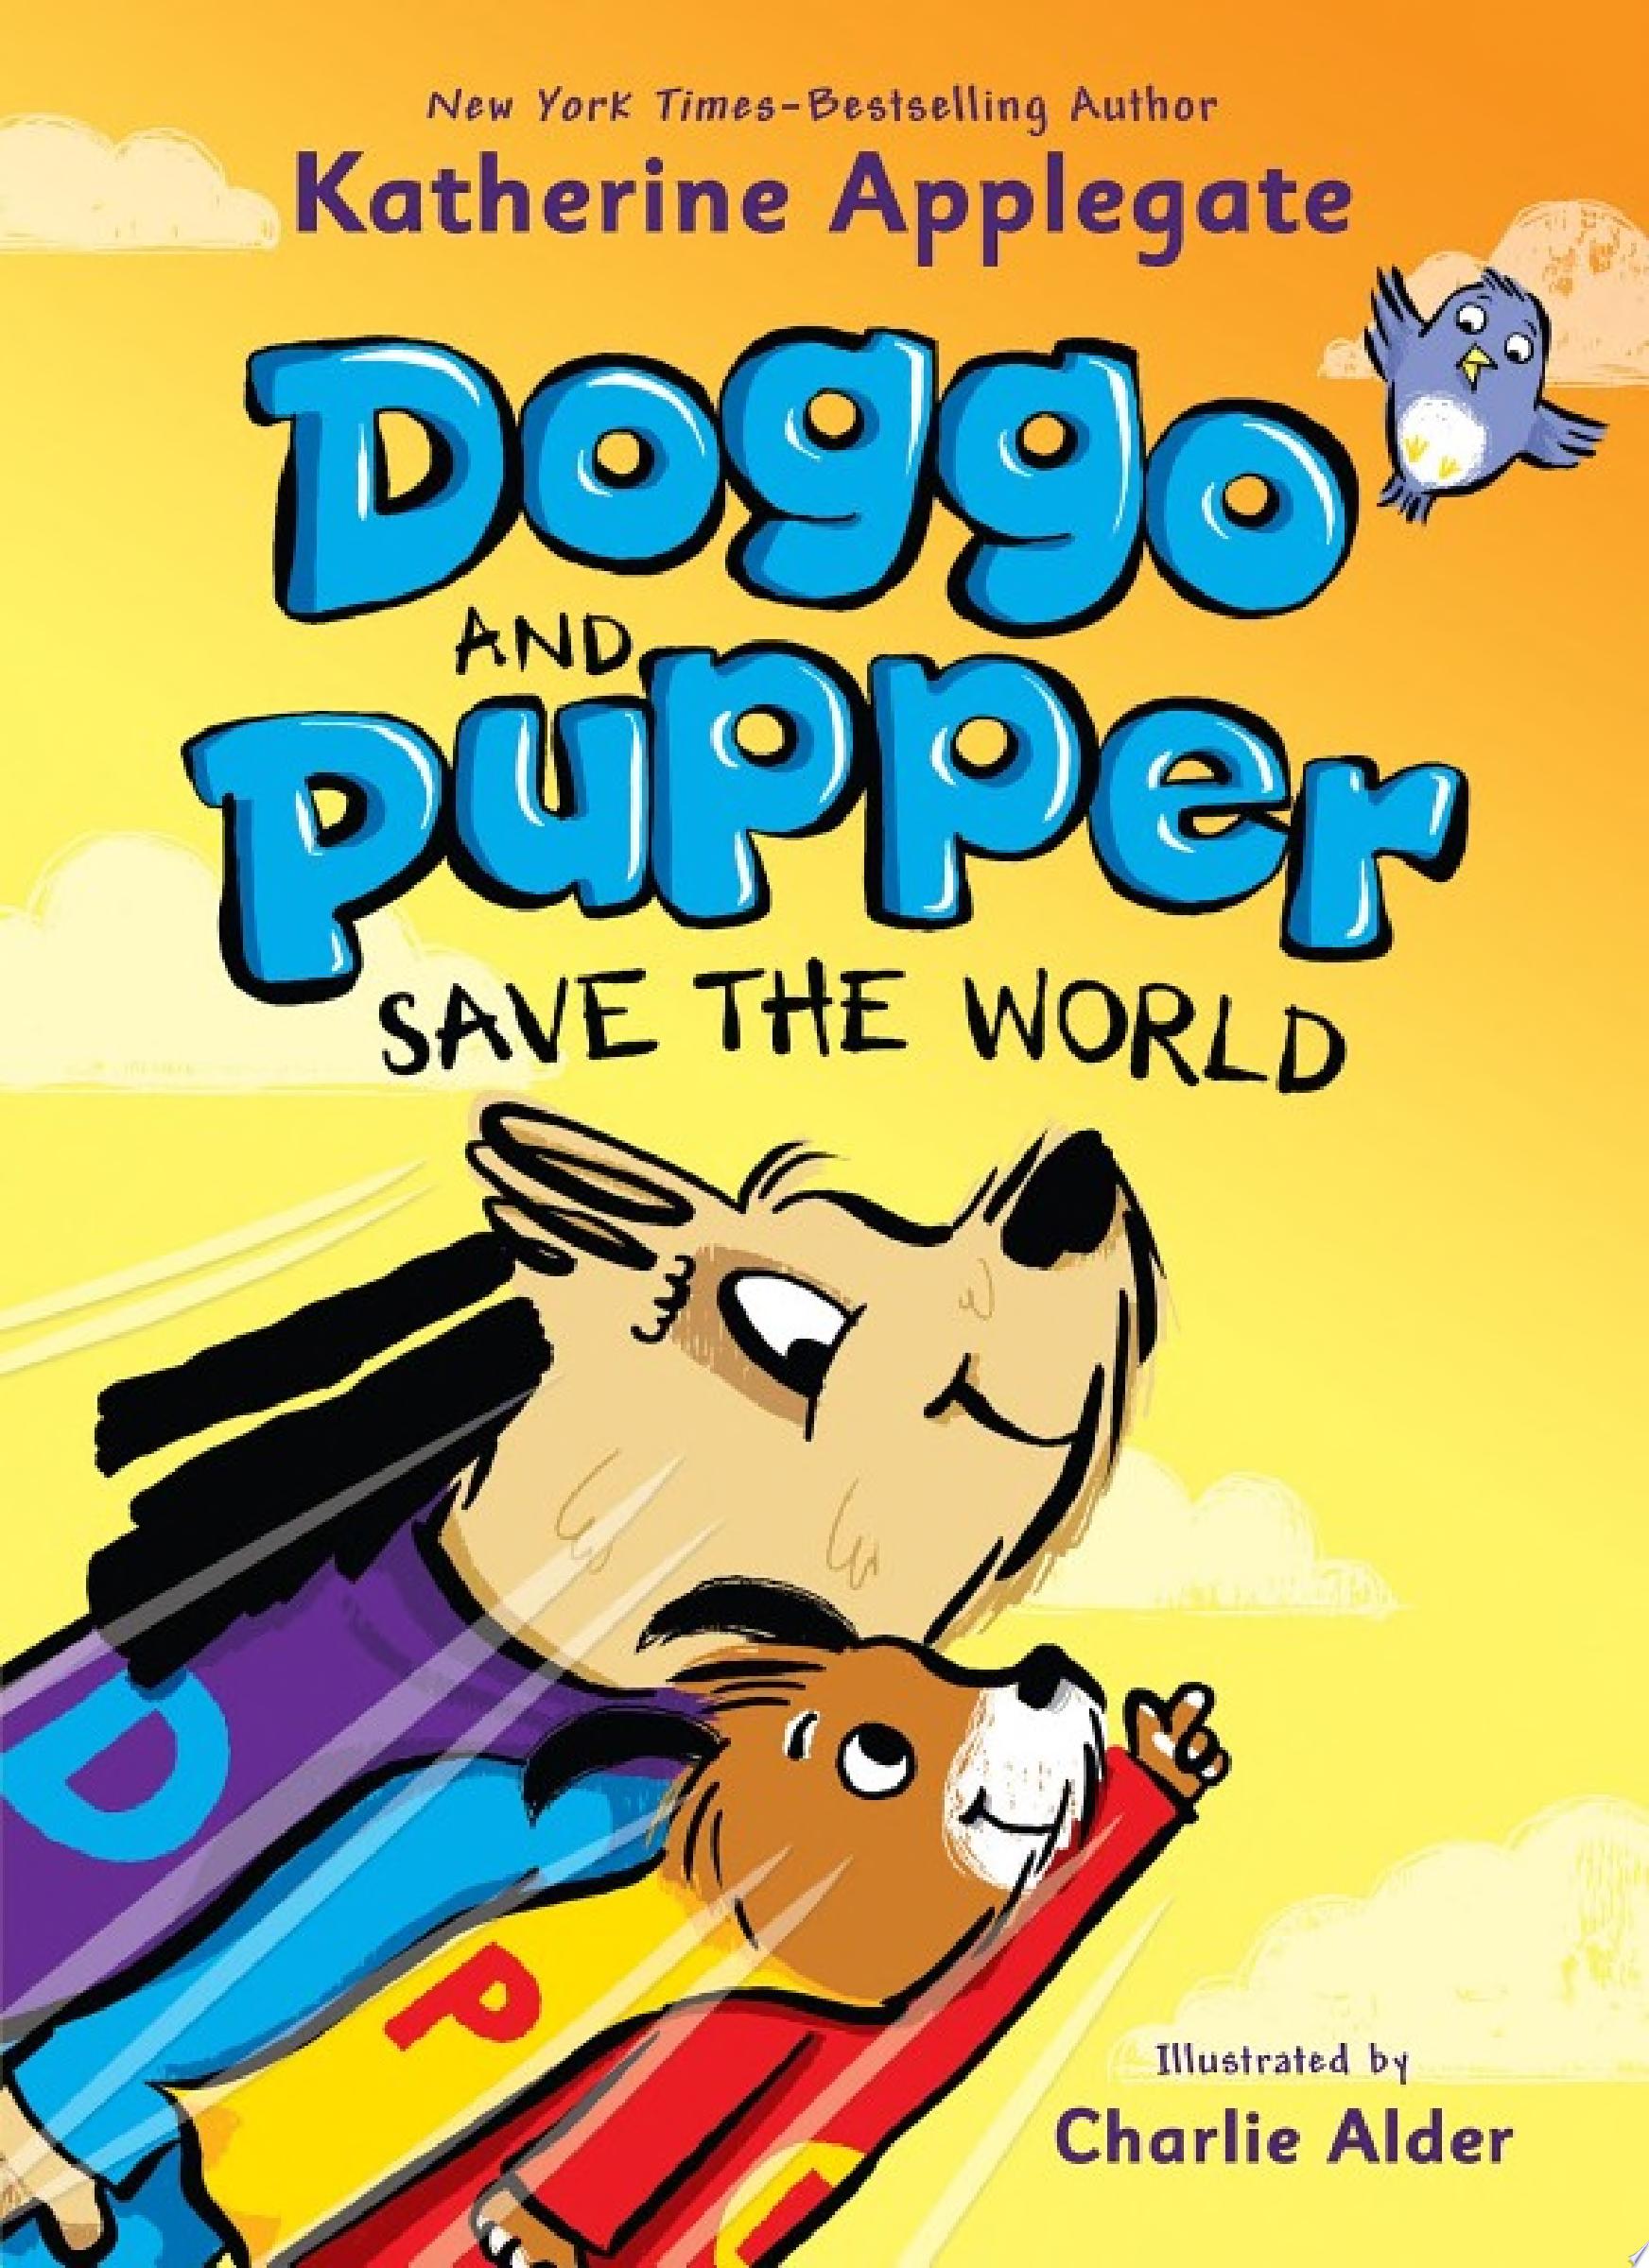 Image for "Doggo and Pupper Save the World"